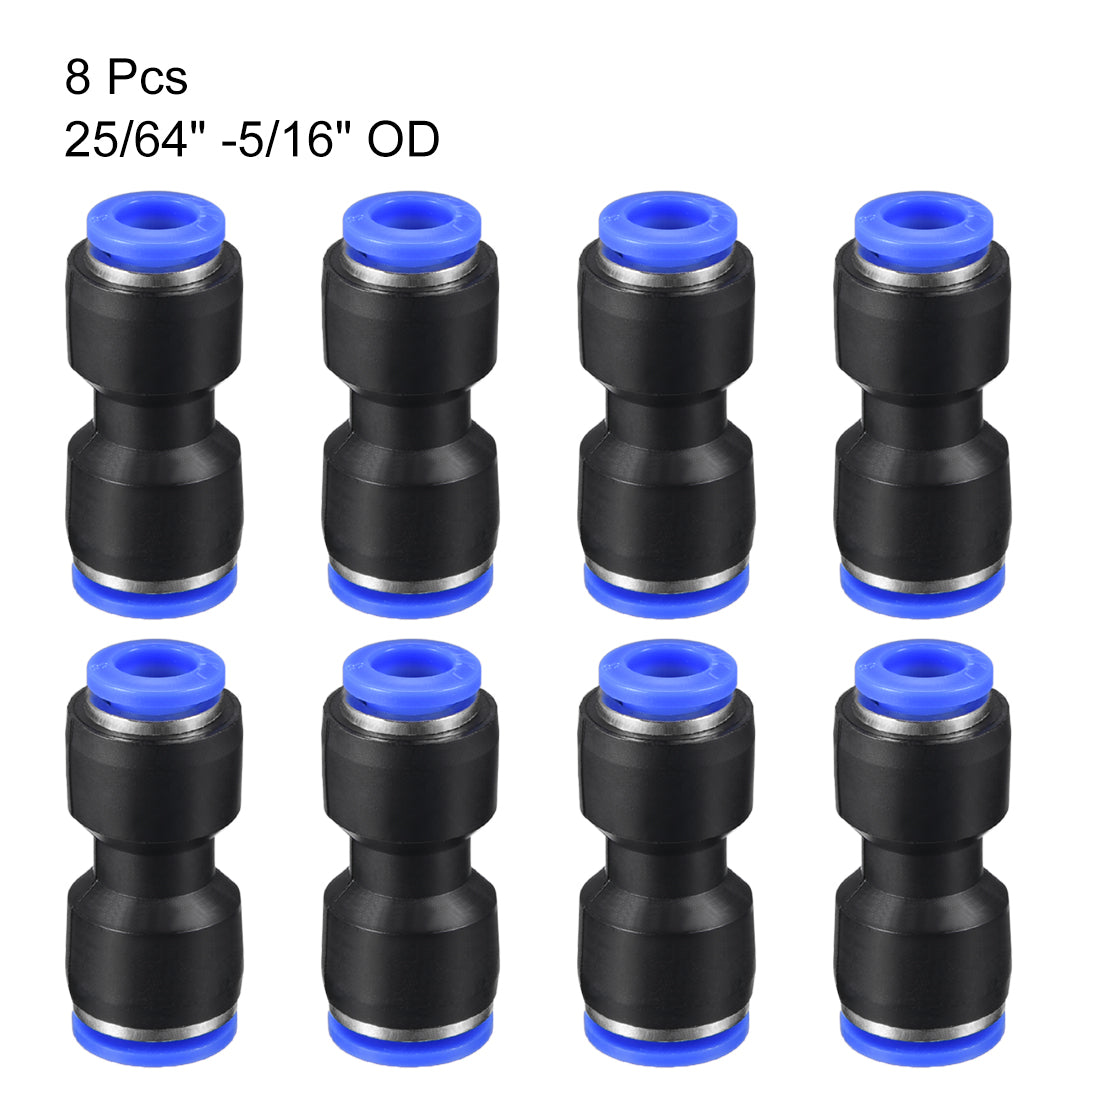 uxcell Uxcell 8pcs Push to Connect Fittings Tube Connect  25/64" -5/16" Straight OD Push Fit Fittings Tube Fittings Push Lock Blue